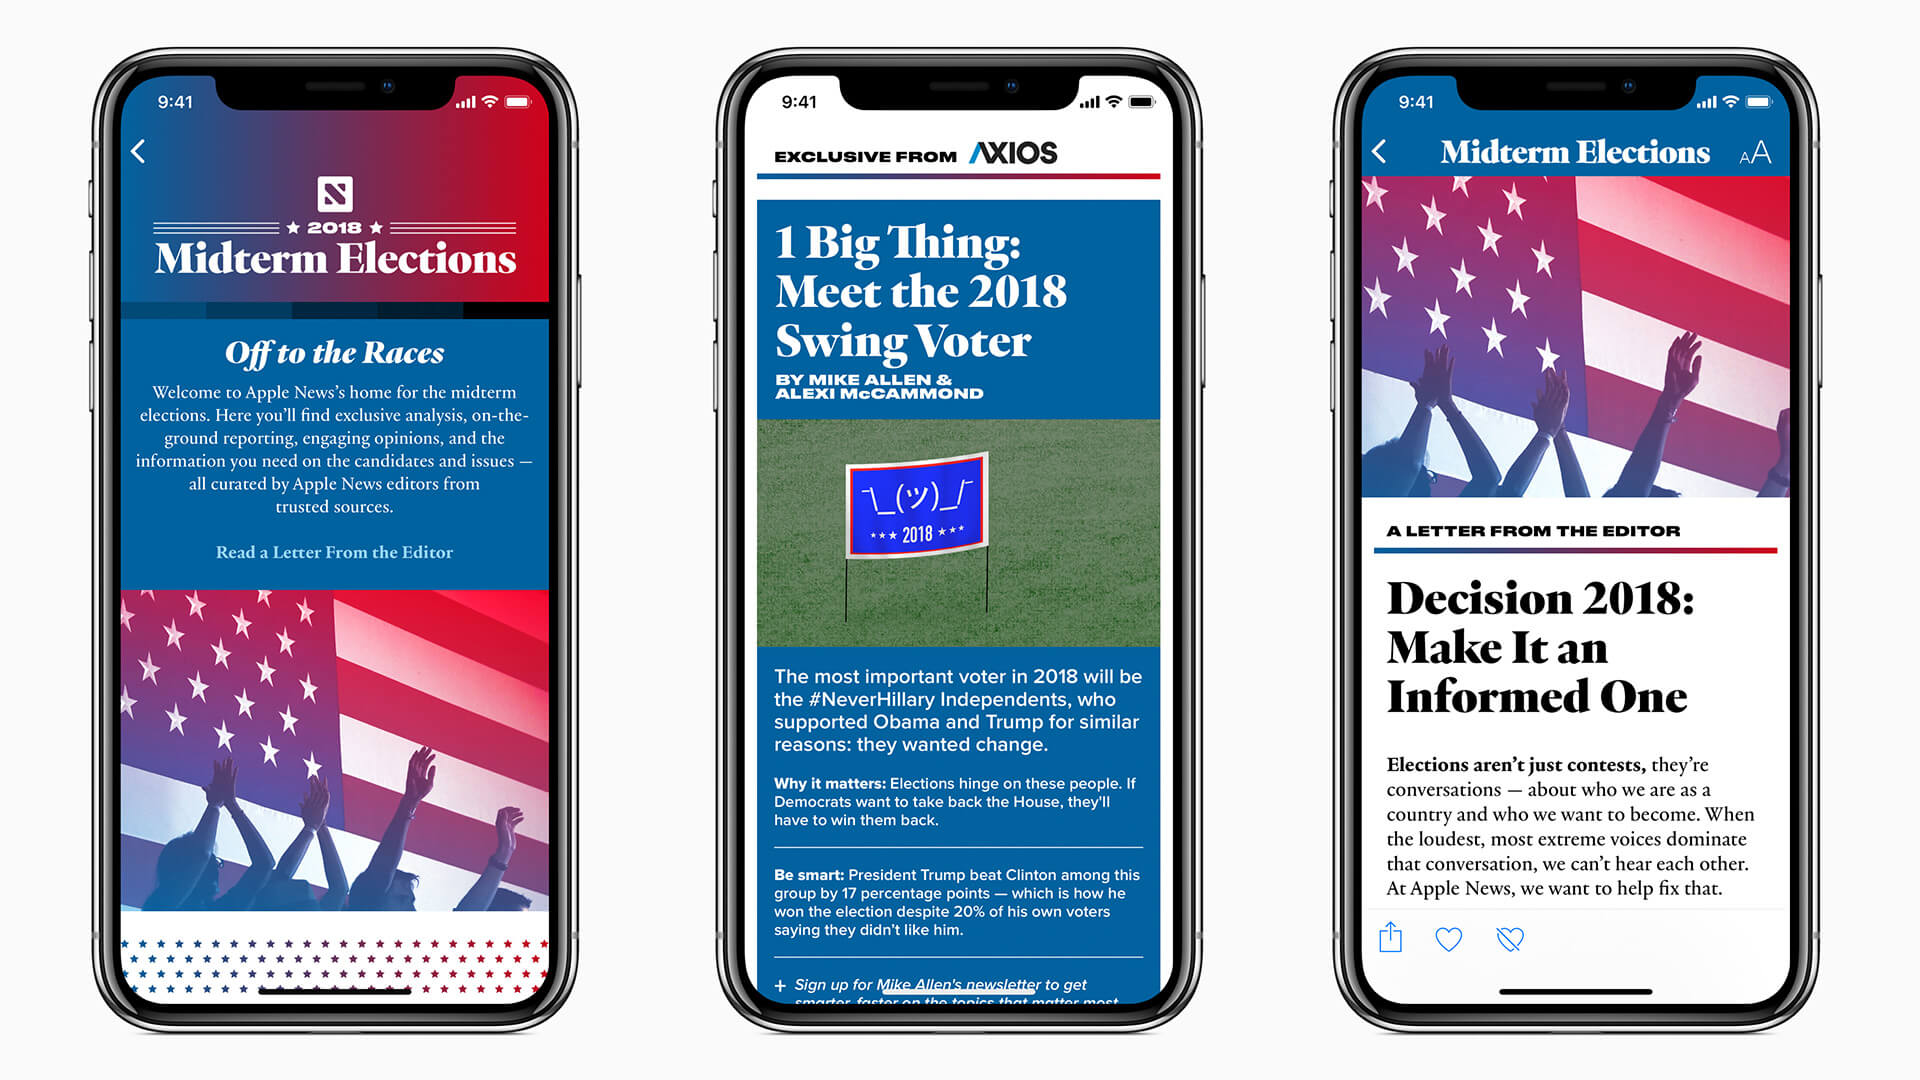 Apple news editors are shaping the way iOS users receive election news